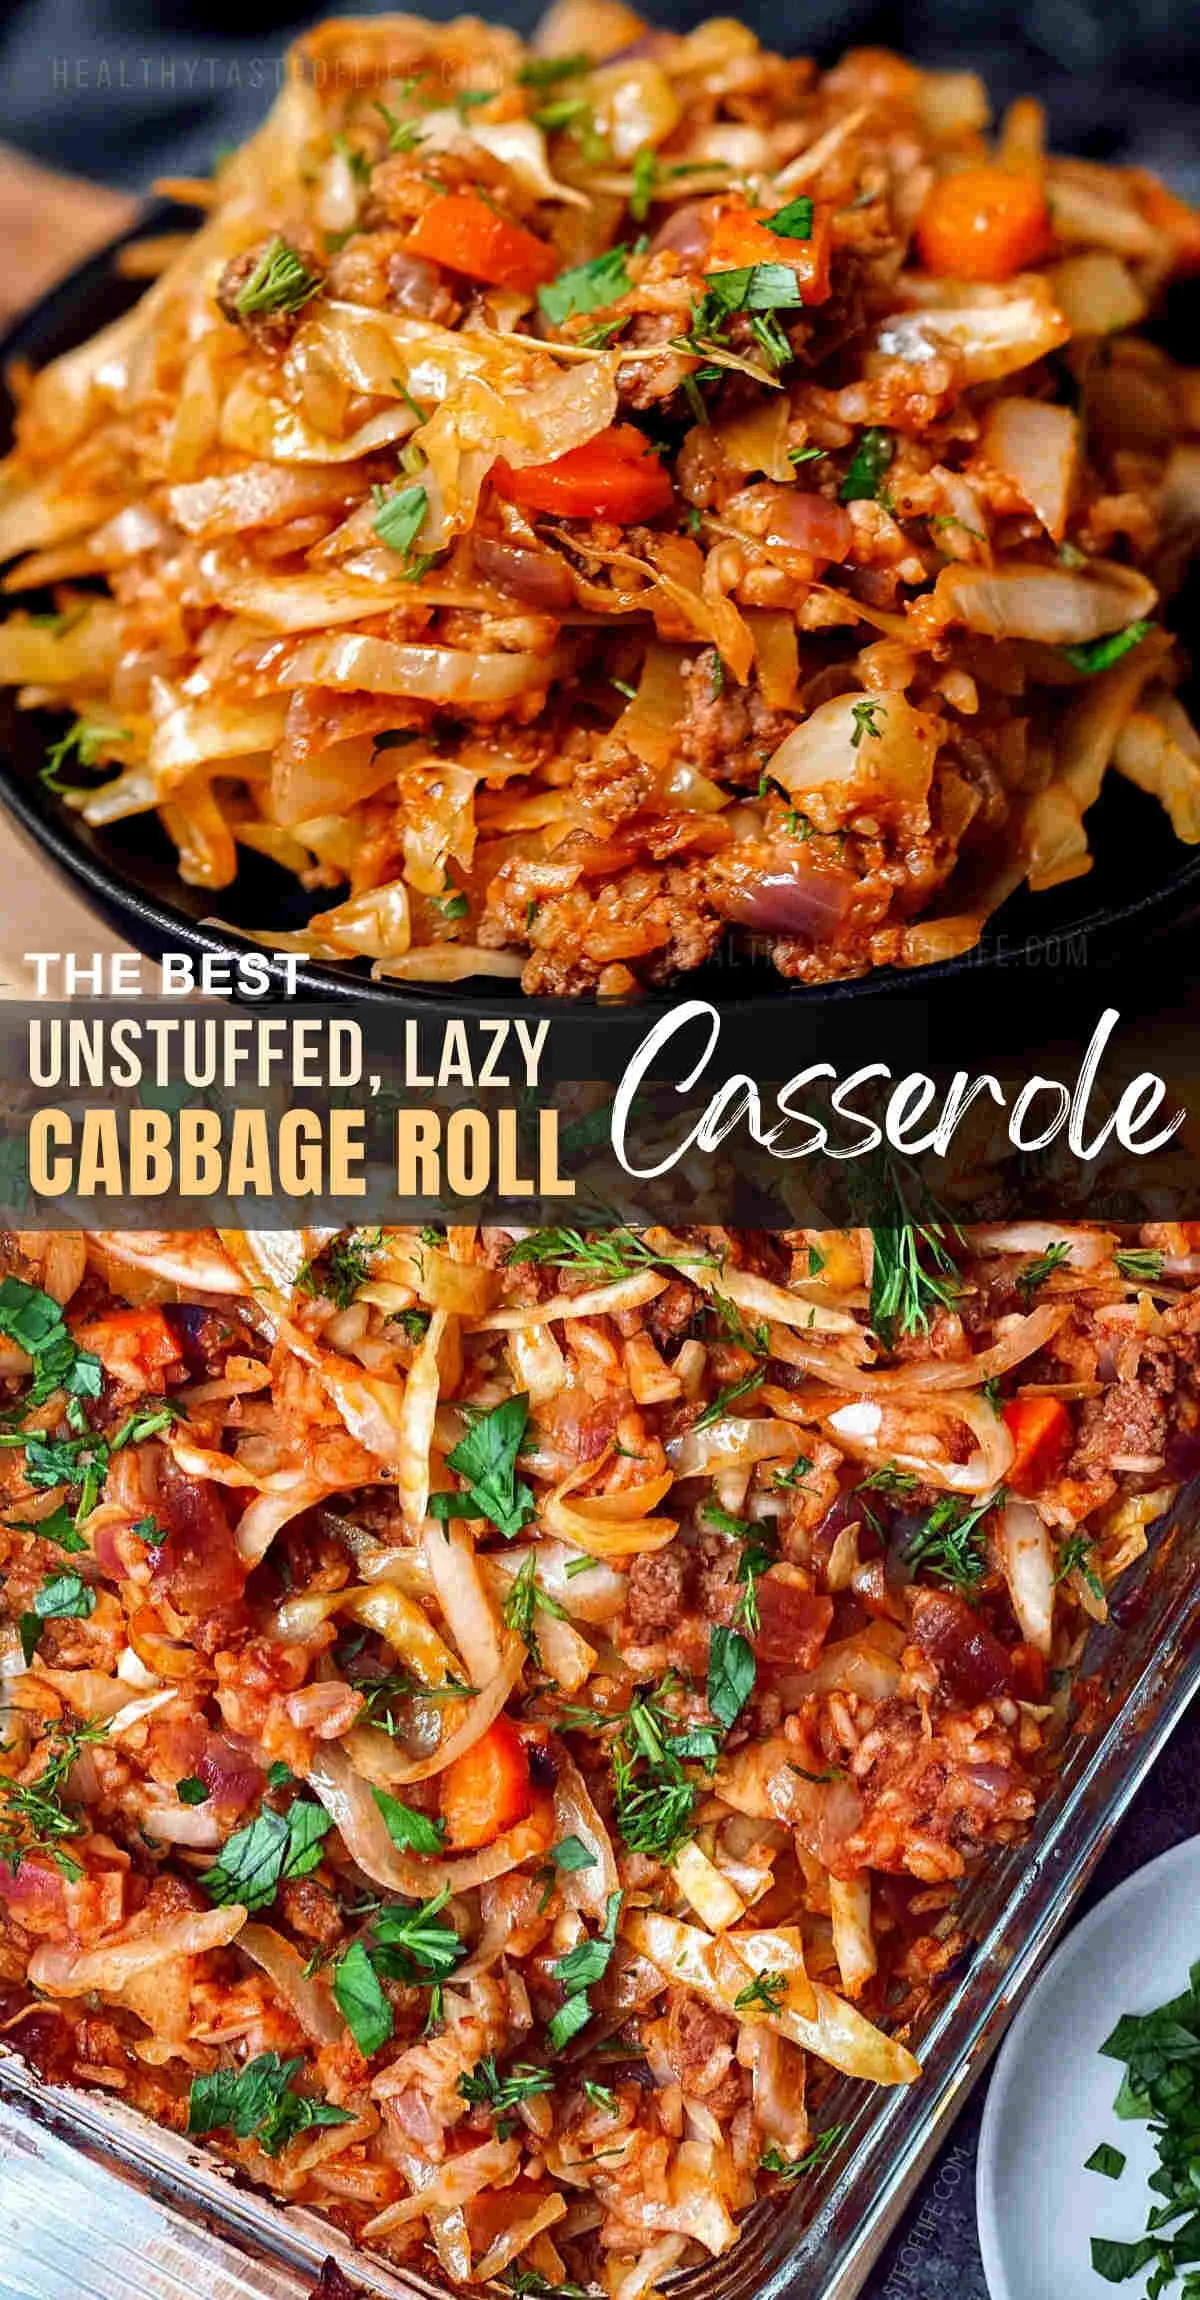 This easy lazy cabbage roll casserole features layers of shredded cabbage, seasoned ground beef, rice in a casserole dish, simply mixed with classic cabbage roll seasonings, tomato sauce, and baked until everything is soft and juicy. The unstuffed lazy man cabbage roll casserole recipe comes together quickly and stores well for days! #cabbageroll #casserole #lazy #unstuffed #cabbagecasserole #easy #lazyman